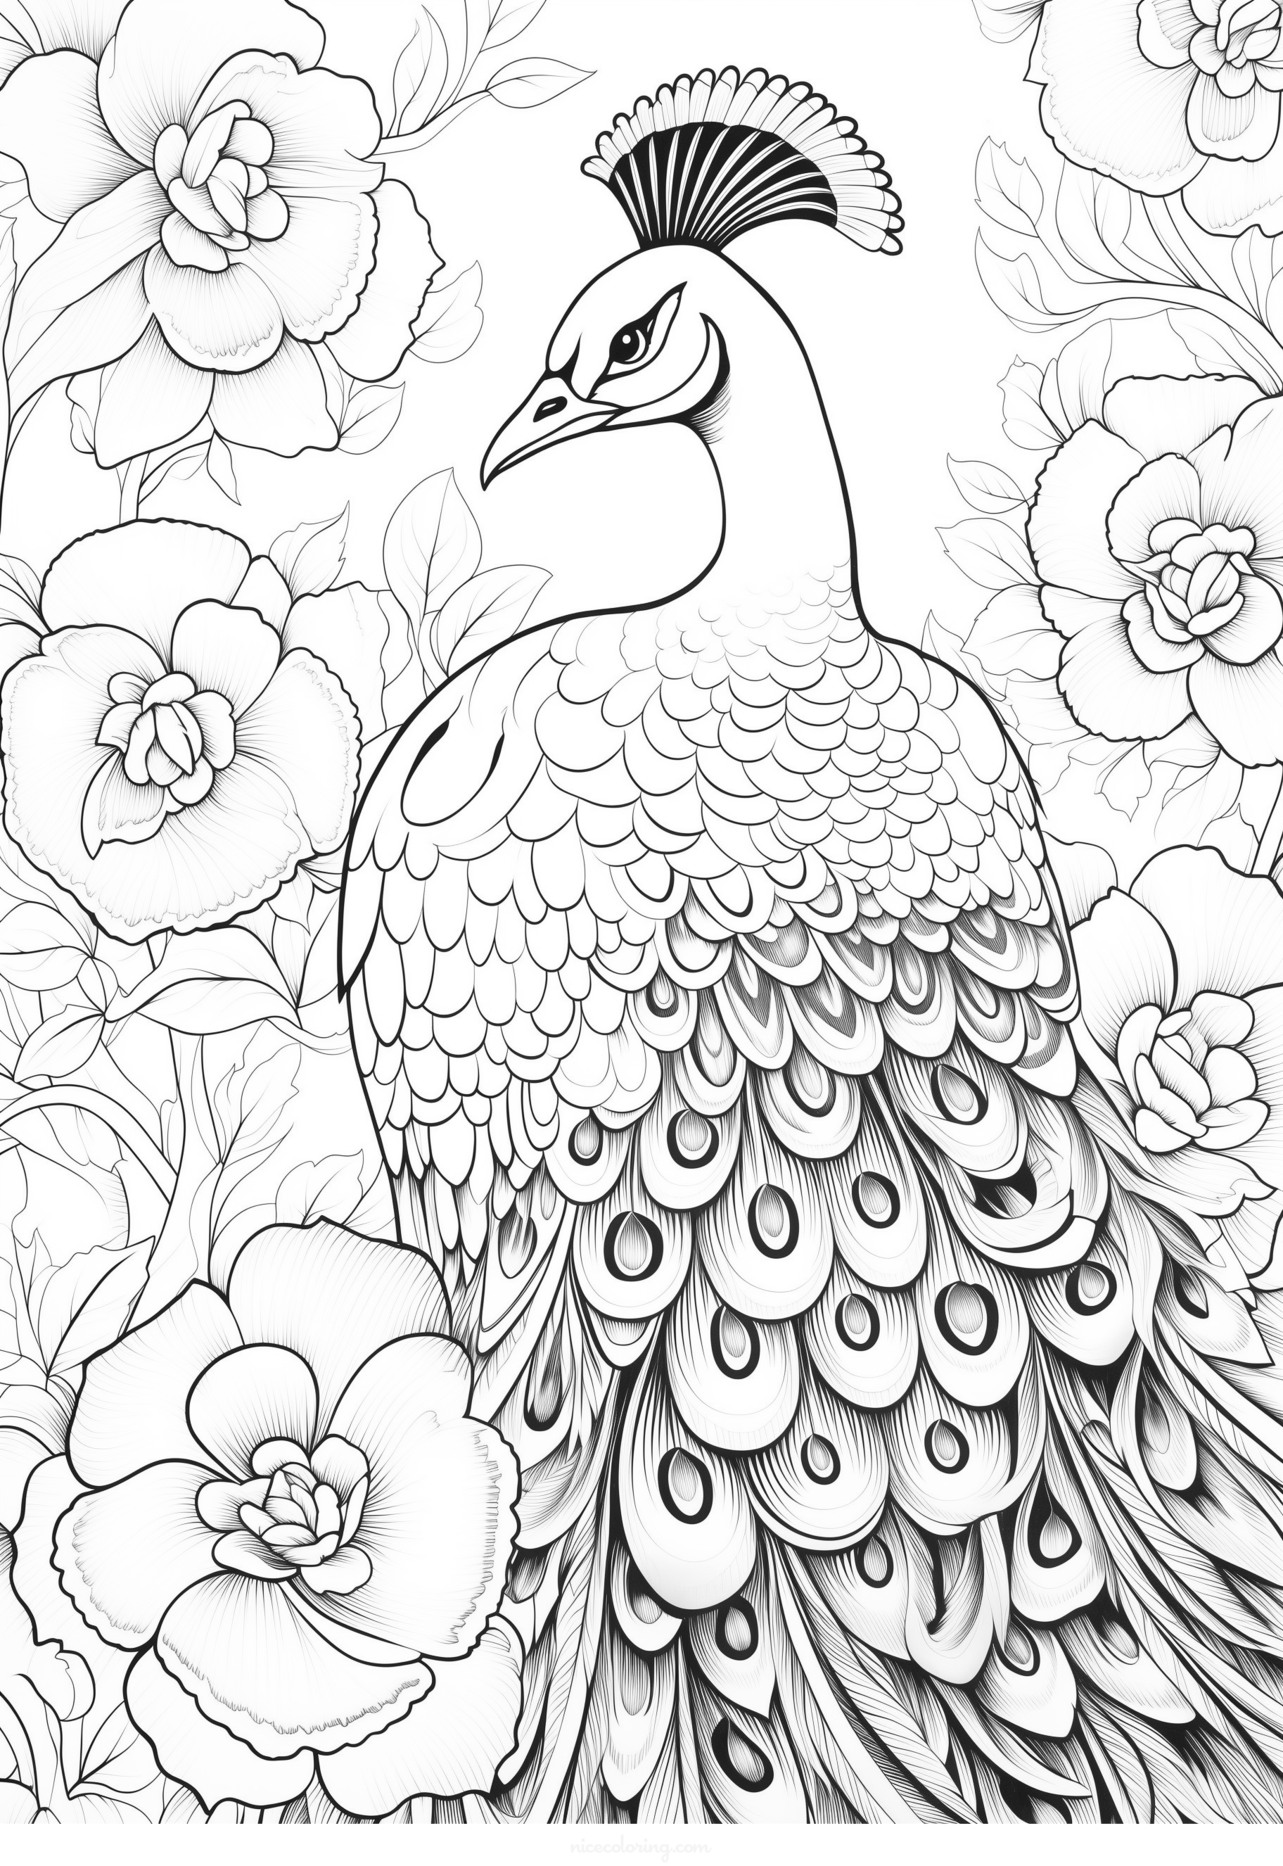 A detailed bird perched on a branch ready to be colored